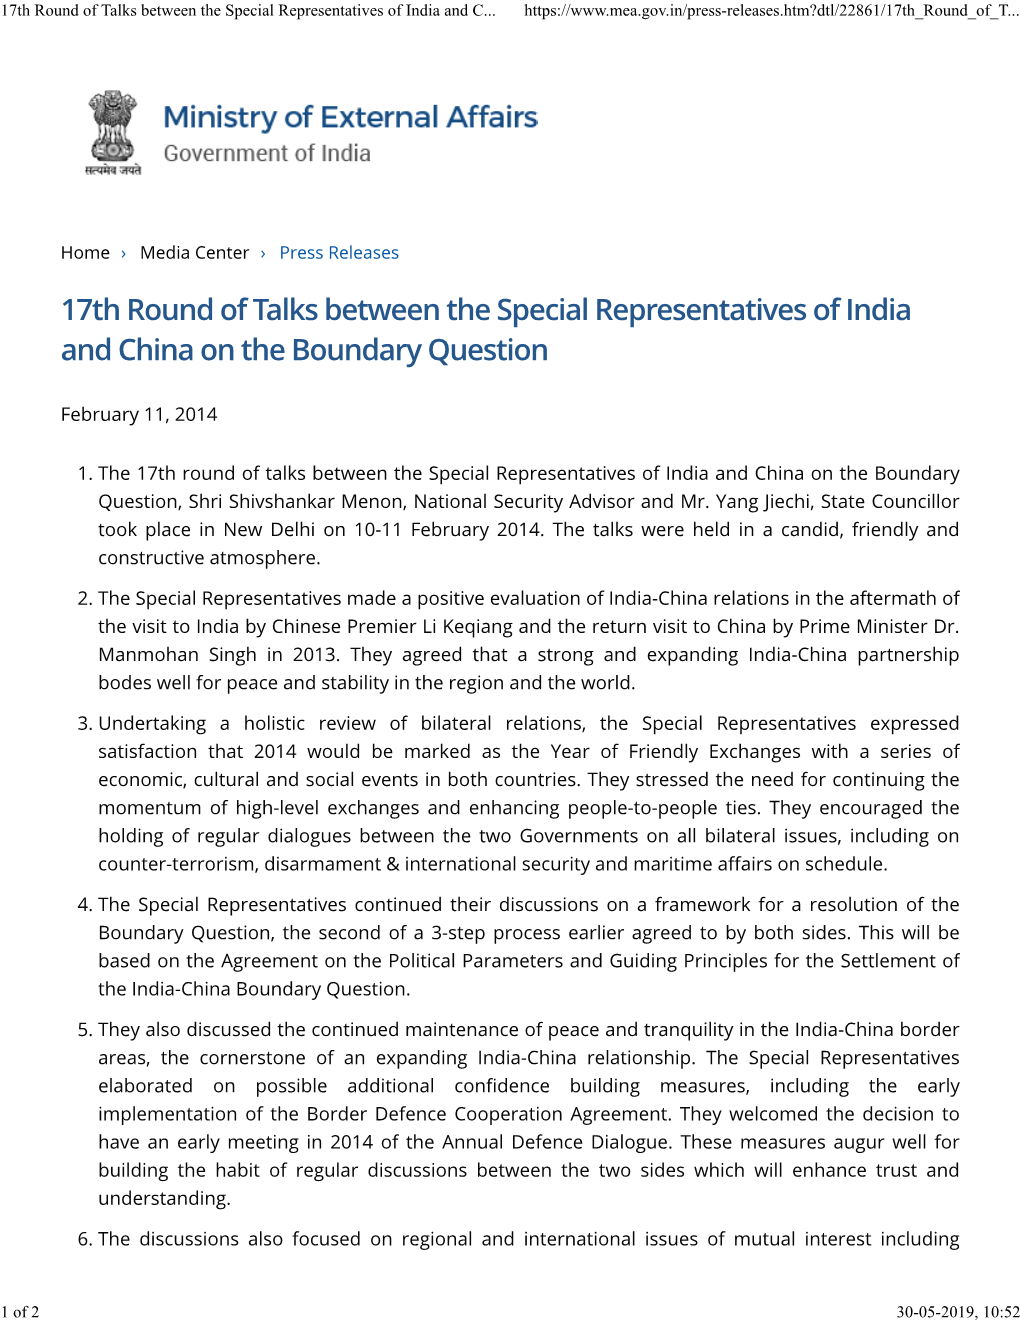 17Th Round of Talks Between the Special Representatives of India and China on the Boundary Question